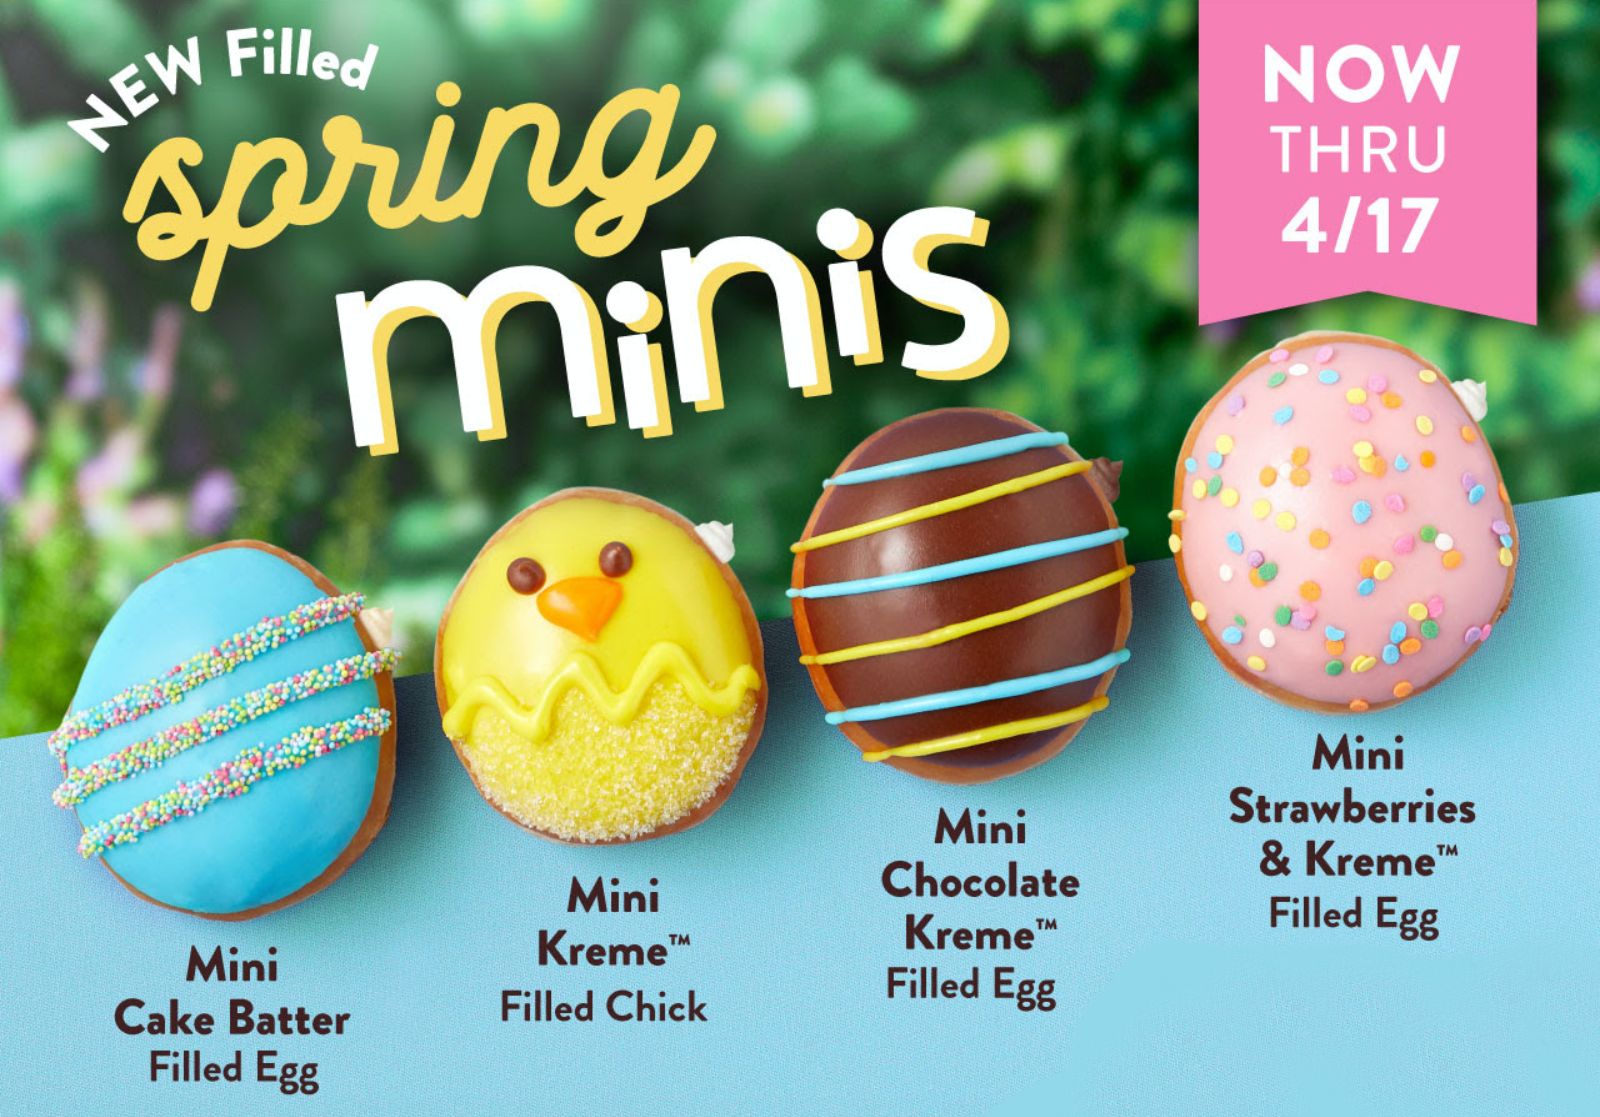 Spring Has Arrived at Krispy Kreme with their New Spring Mini Doughnuts